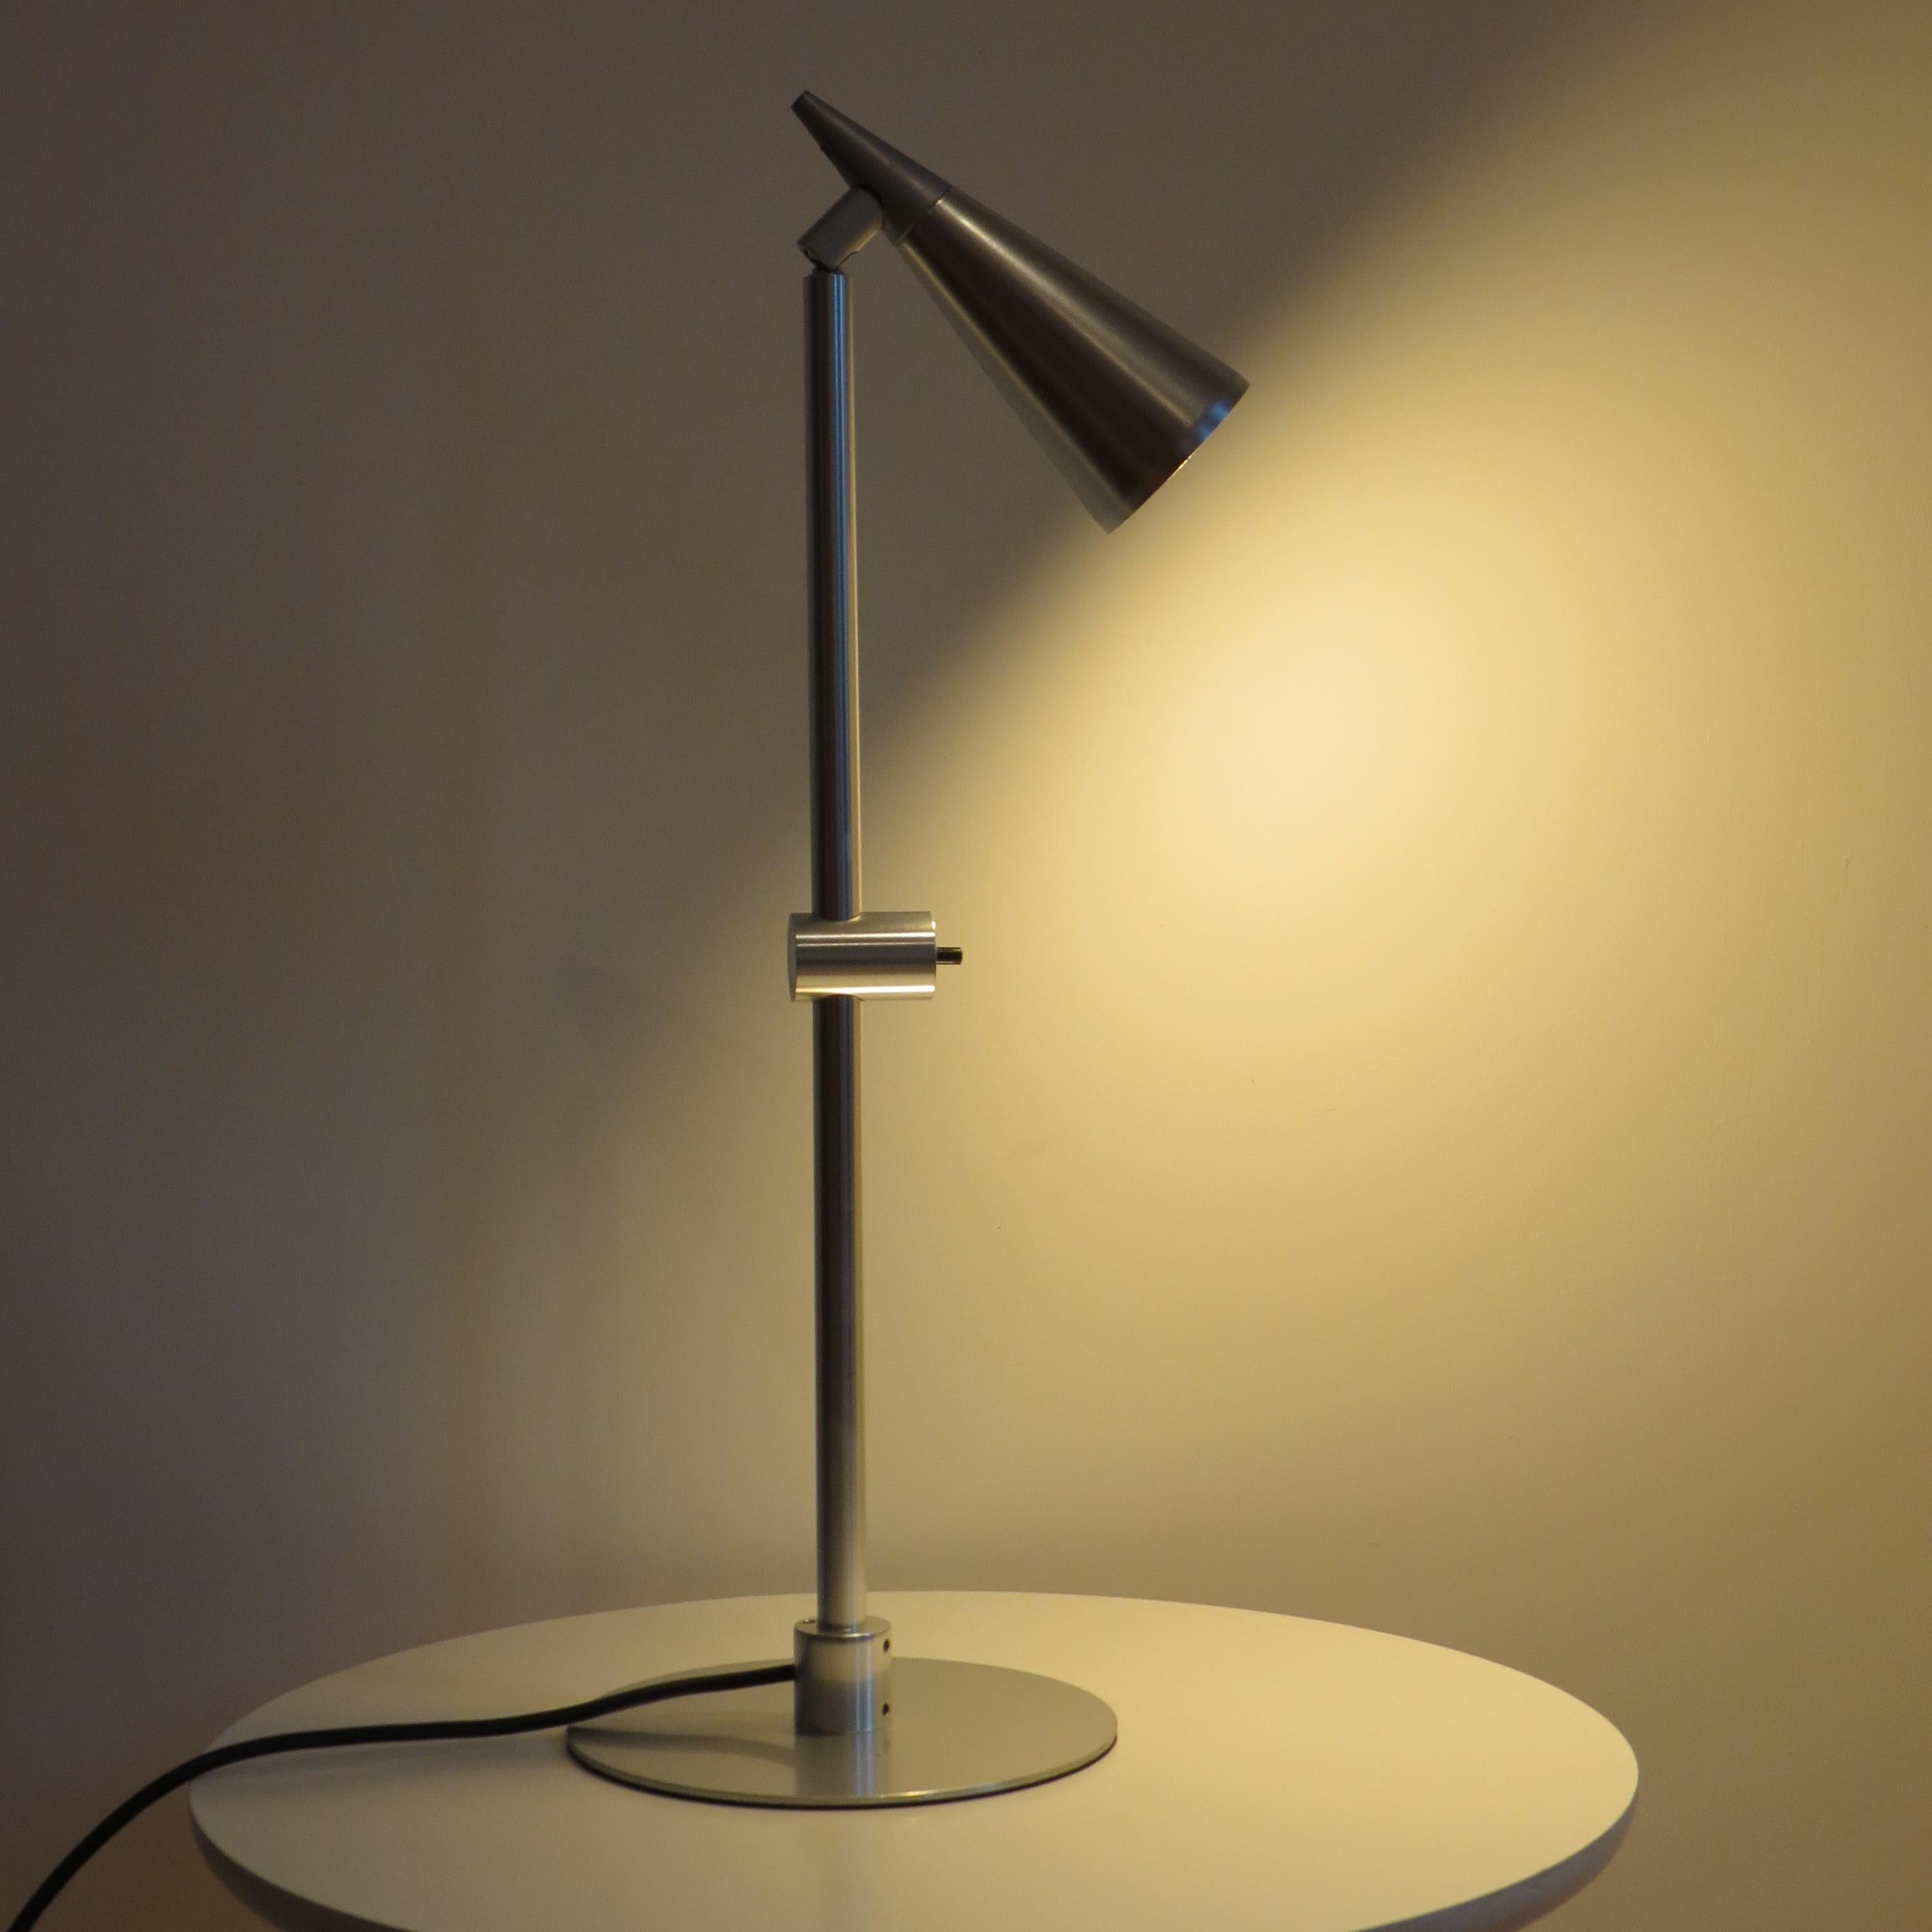 English Rare Prototype Aluminium Desk Lamp by Peter Nelson 1960s For Sale